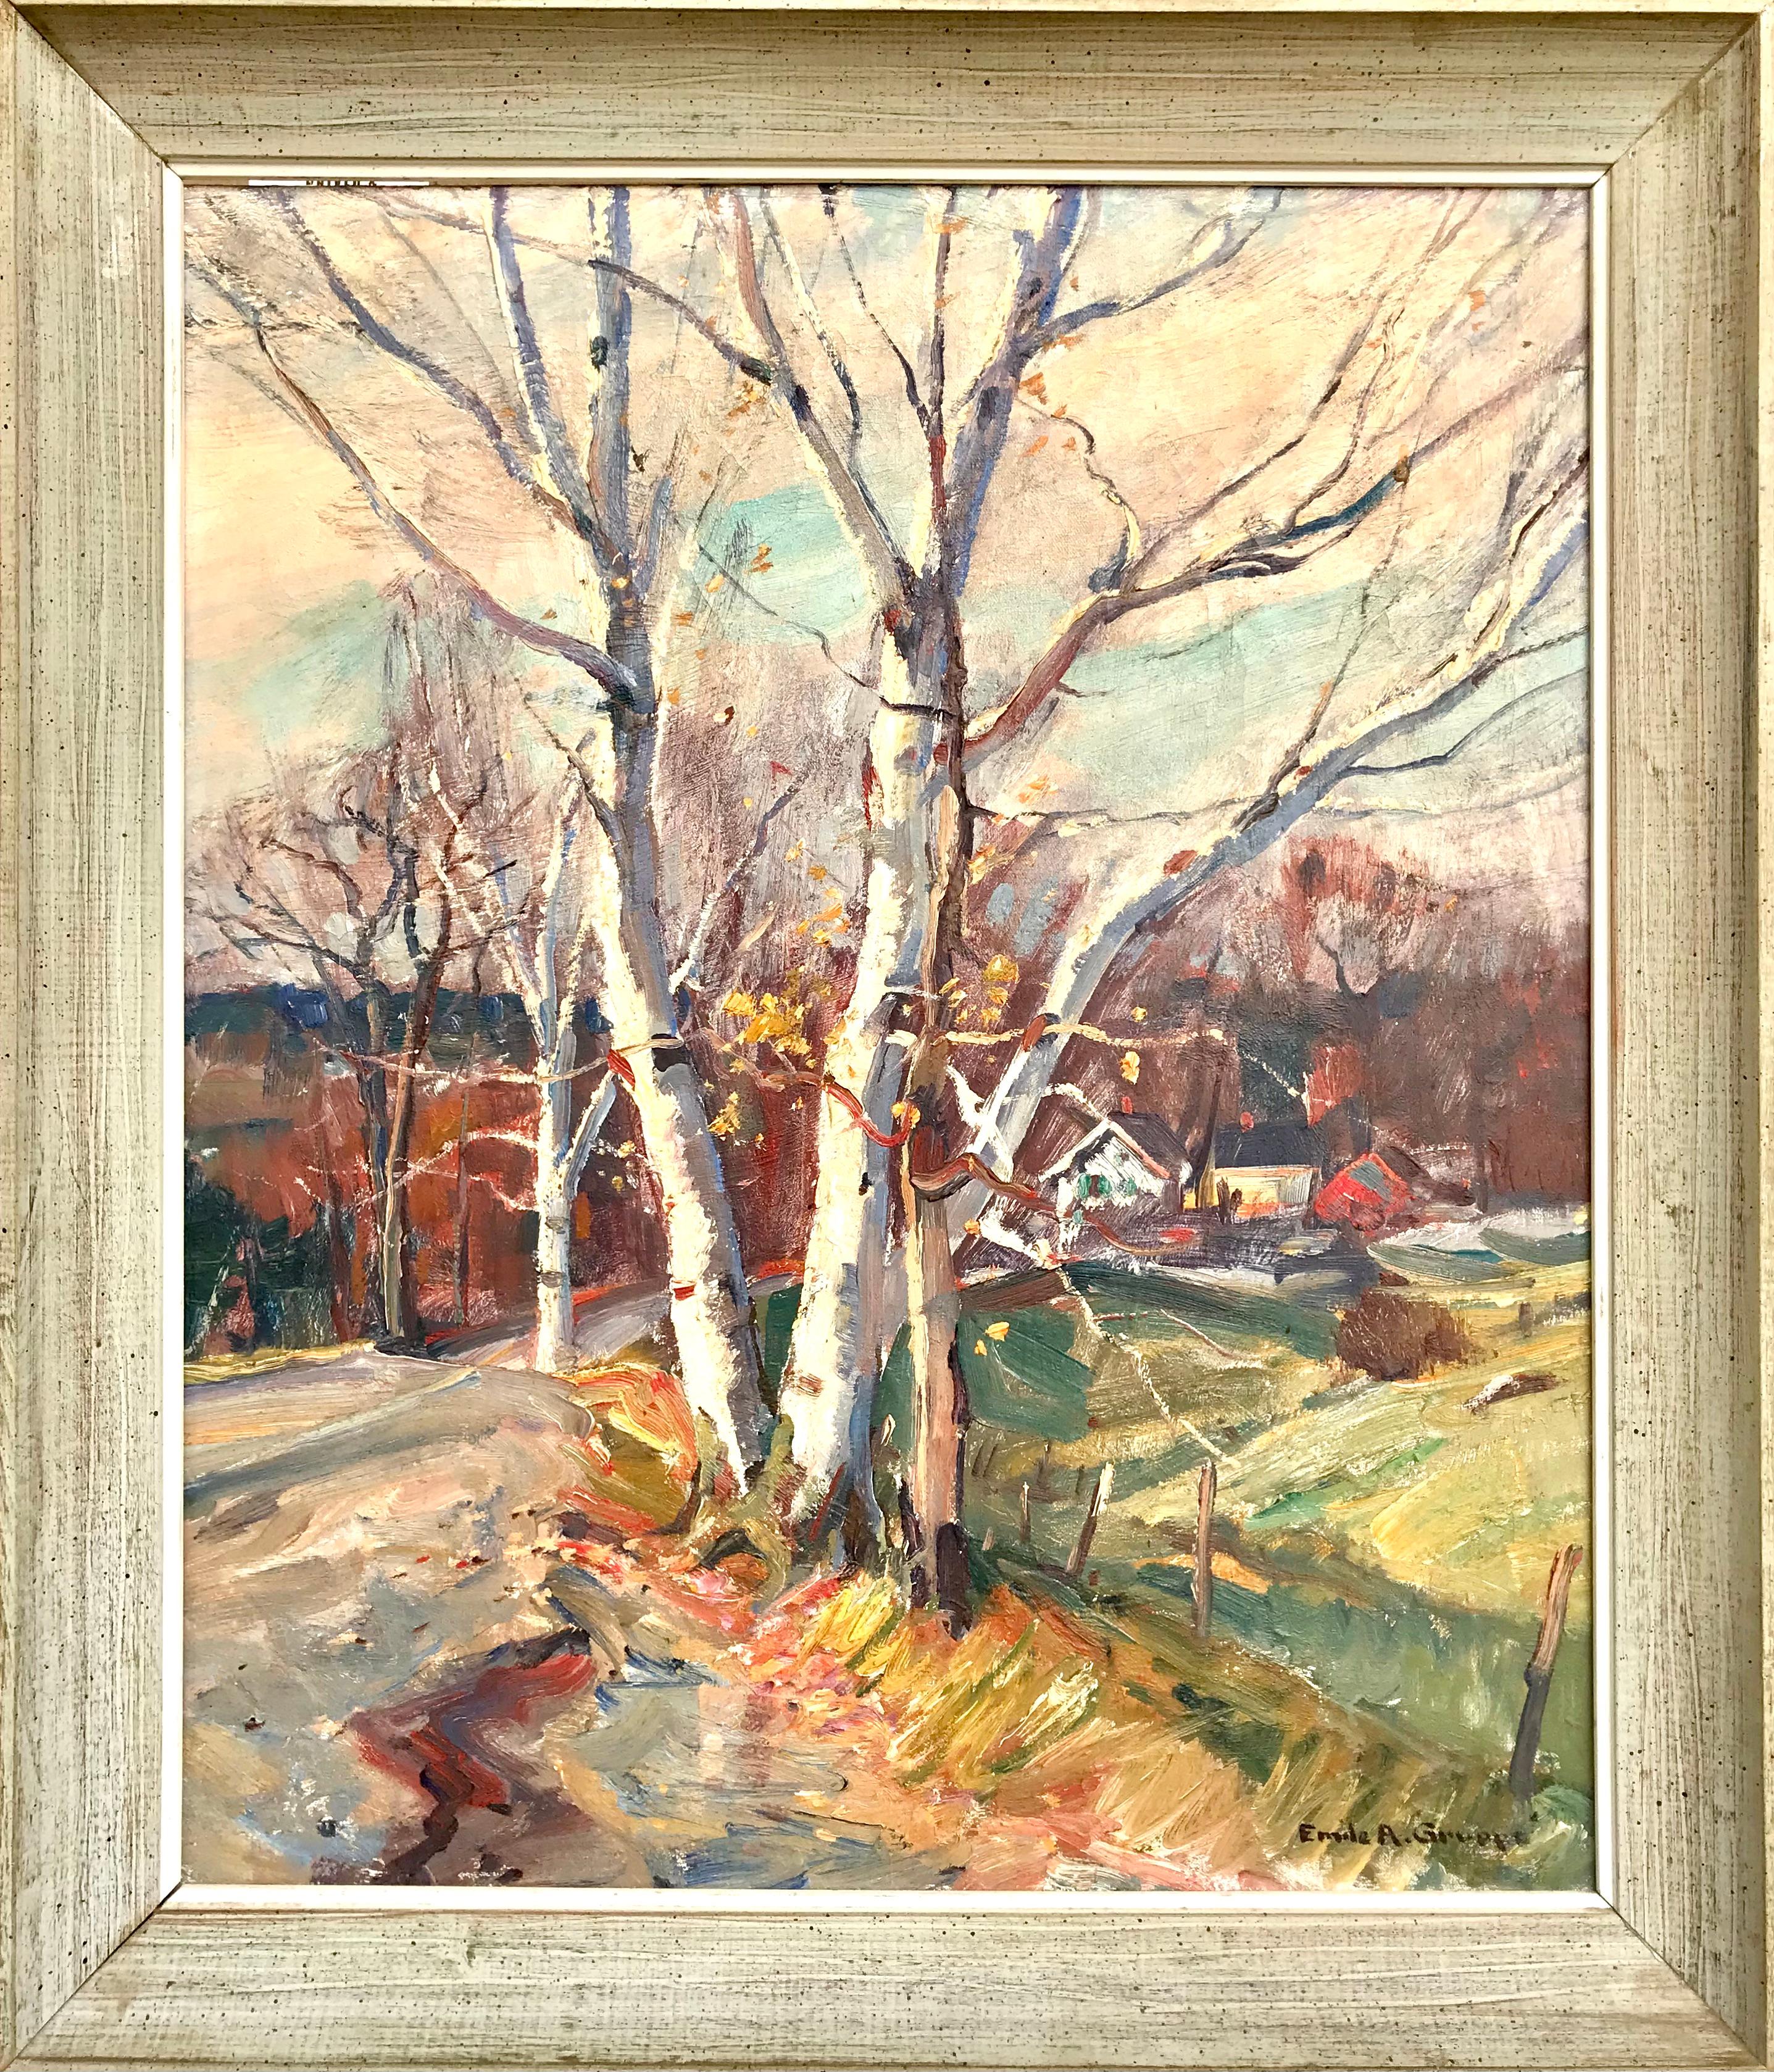 Emile Albert Gruppe Birches Along The Road
Signed:. l.r. Emile A. Gruppe; also signed and titled on stretcher
Oil On Canvas
Dimensions: 30 by 25 inches
Framed 34.5 by 29.5 inches

Another signature Massachusetts or Vermont birth painting during the